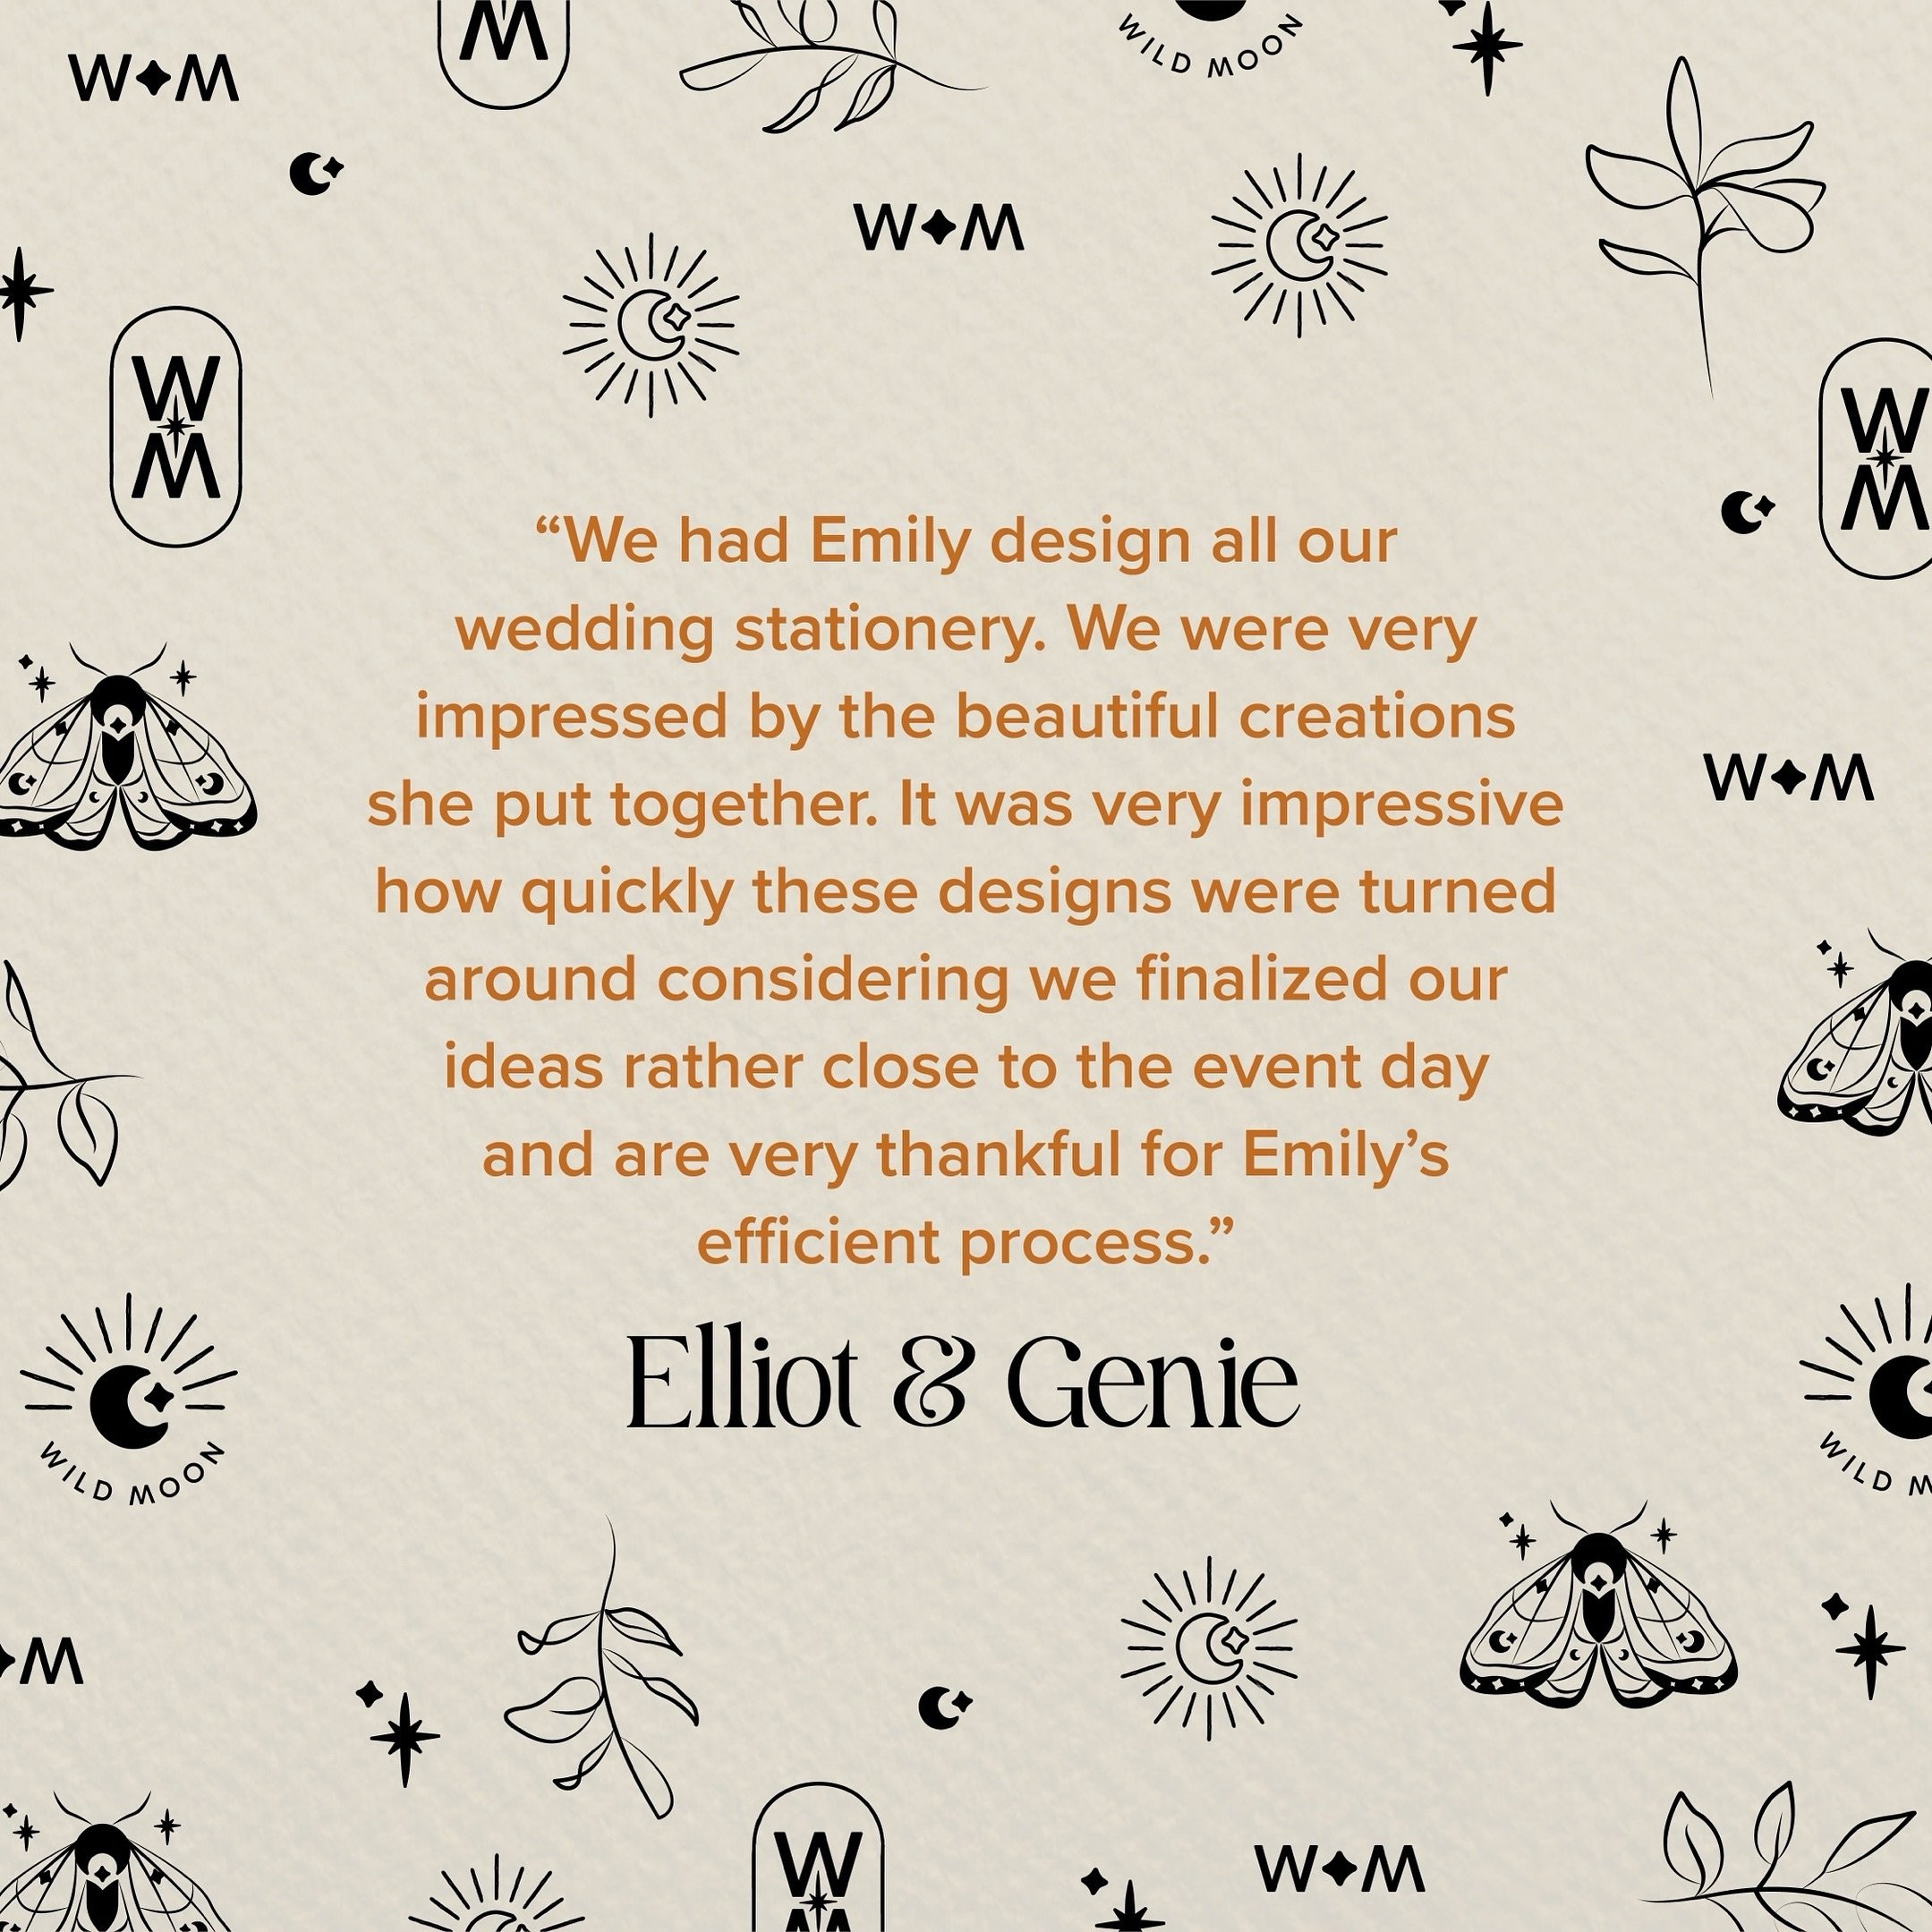 💌 LOVE NOTE 💌

I can&rsquo;t tell you how much I appreciate every review I get! Thank you so much Elliot and Genie. ✨

If you&rsquo;d like to leave me a review you can do so by googling Wild Moon Wedding Stationery 🖤

#weddingsupplier #weddingstat